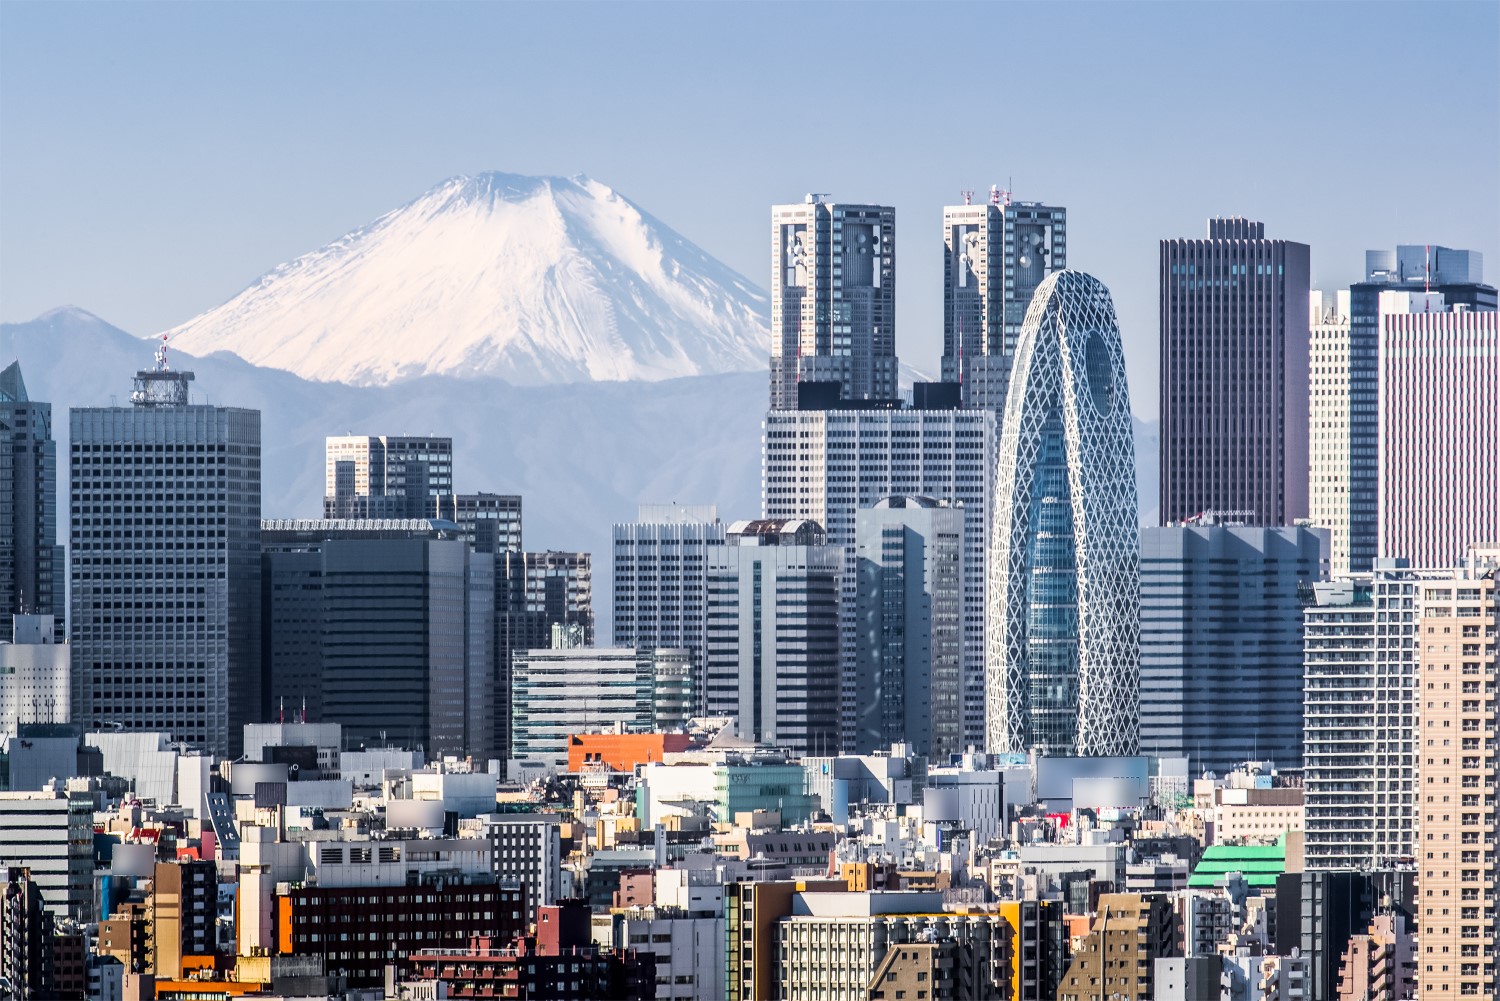 Japan’s-new-fsa-chief-stands-firm-on-crypto-regulation,-calls-for-push-on-digital-yen